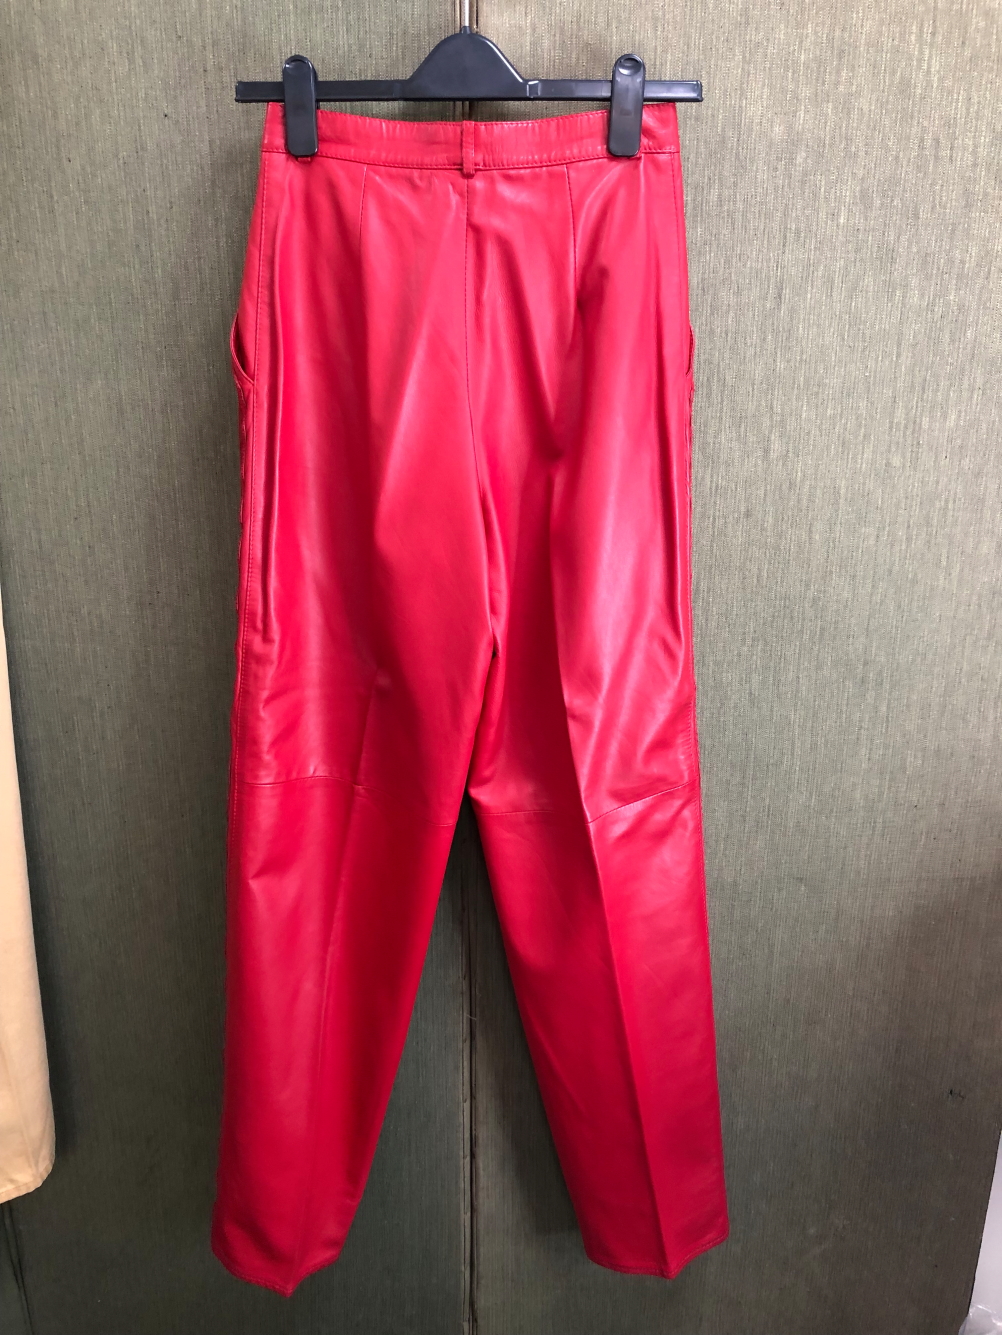 A PAIR OF AMORETTI ITALY RED LEATHER EFFECT TROUSERS WITH DETAIL RUNNING DOWN THE OUTER LEG, - Image 11 of 21